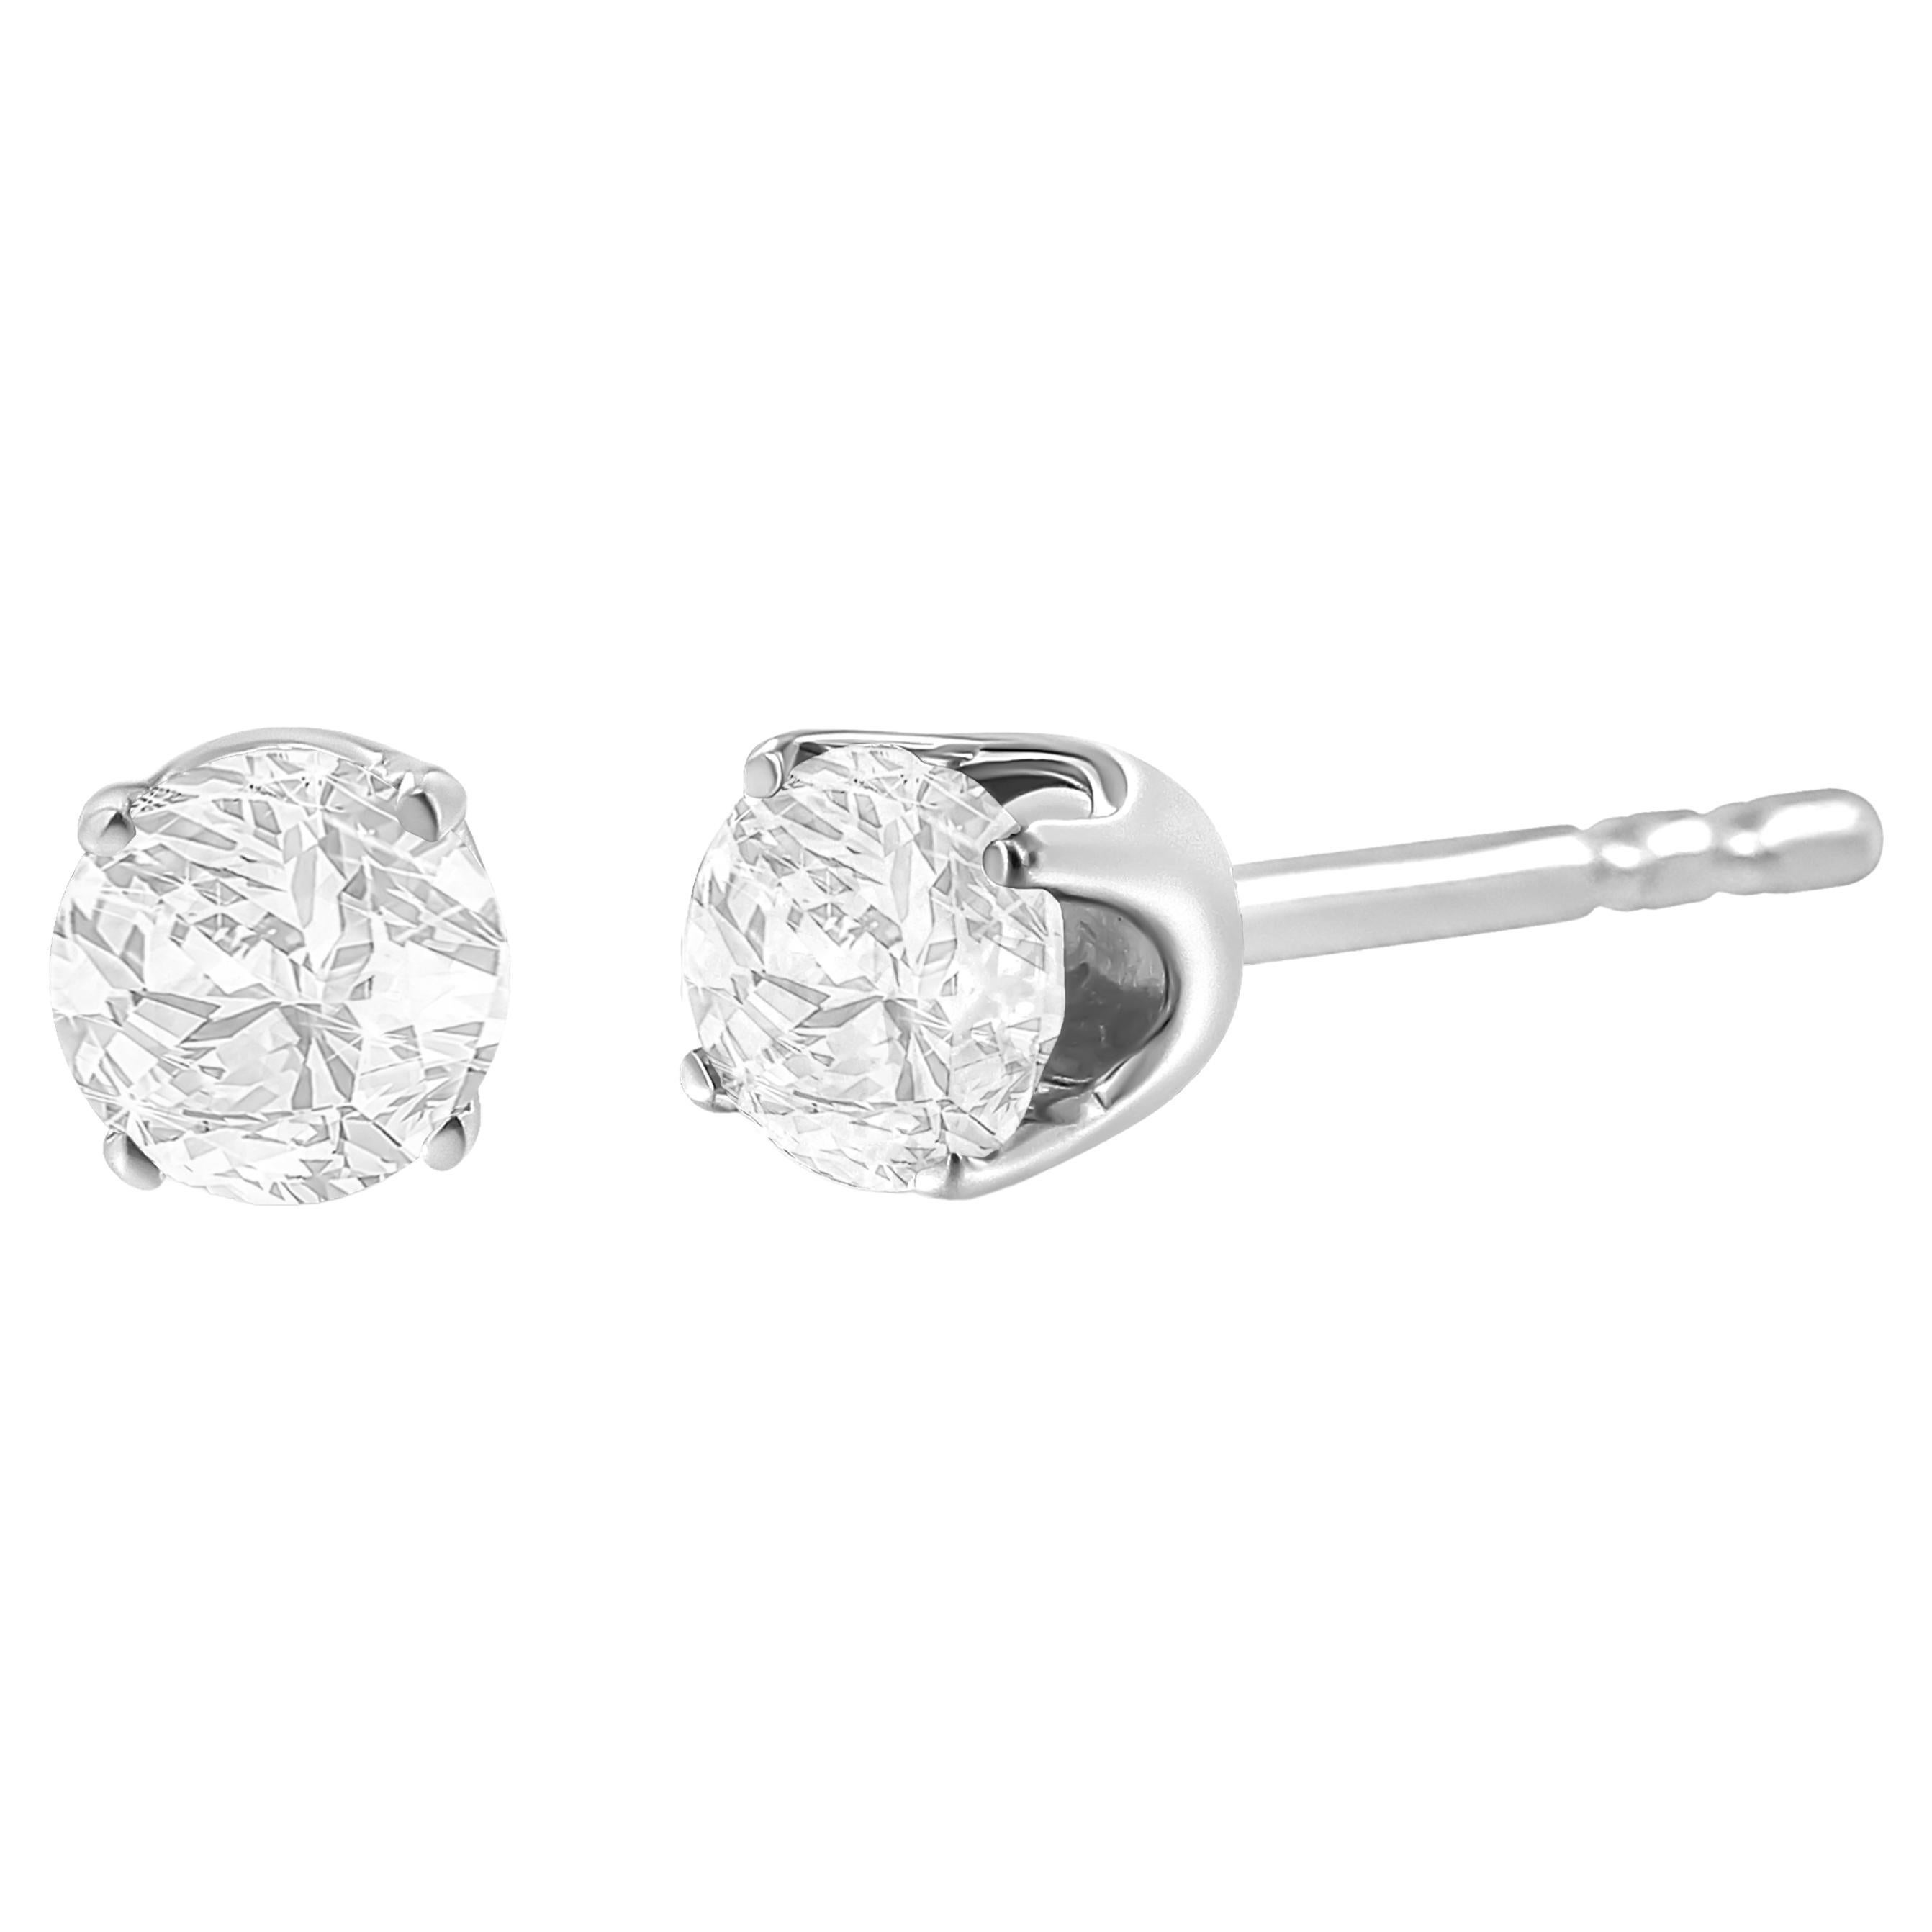 AGS Certified 14K White Gold 1.00 Carat Solitaire Diamond Stud Earrings